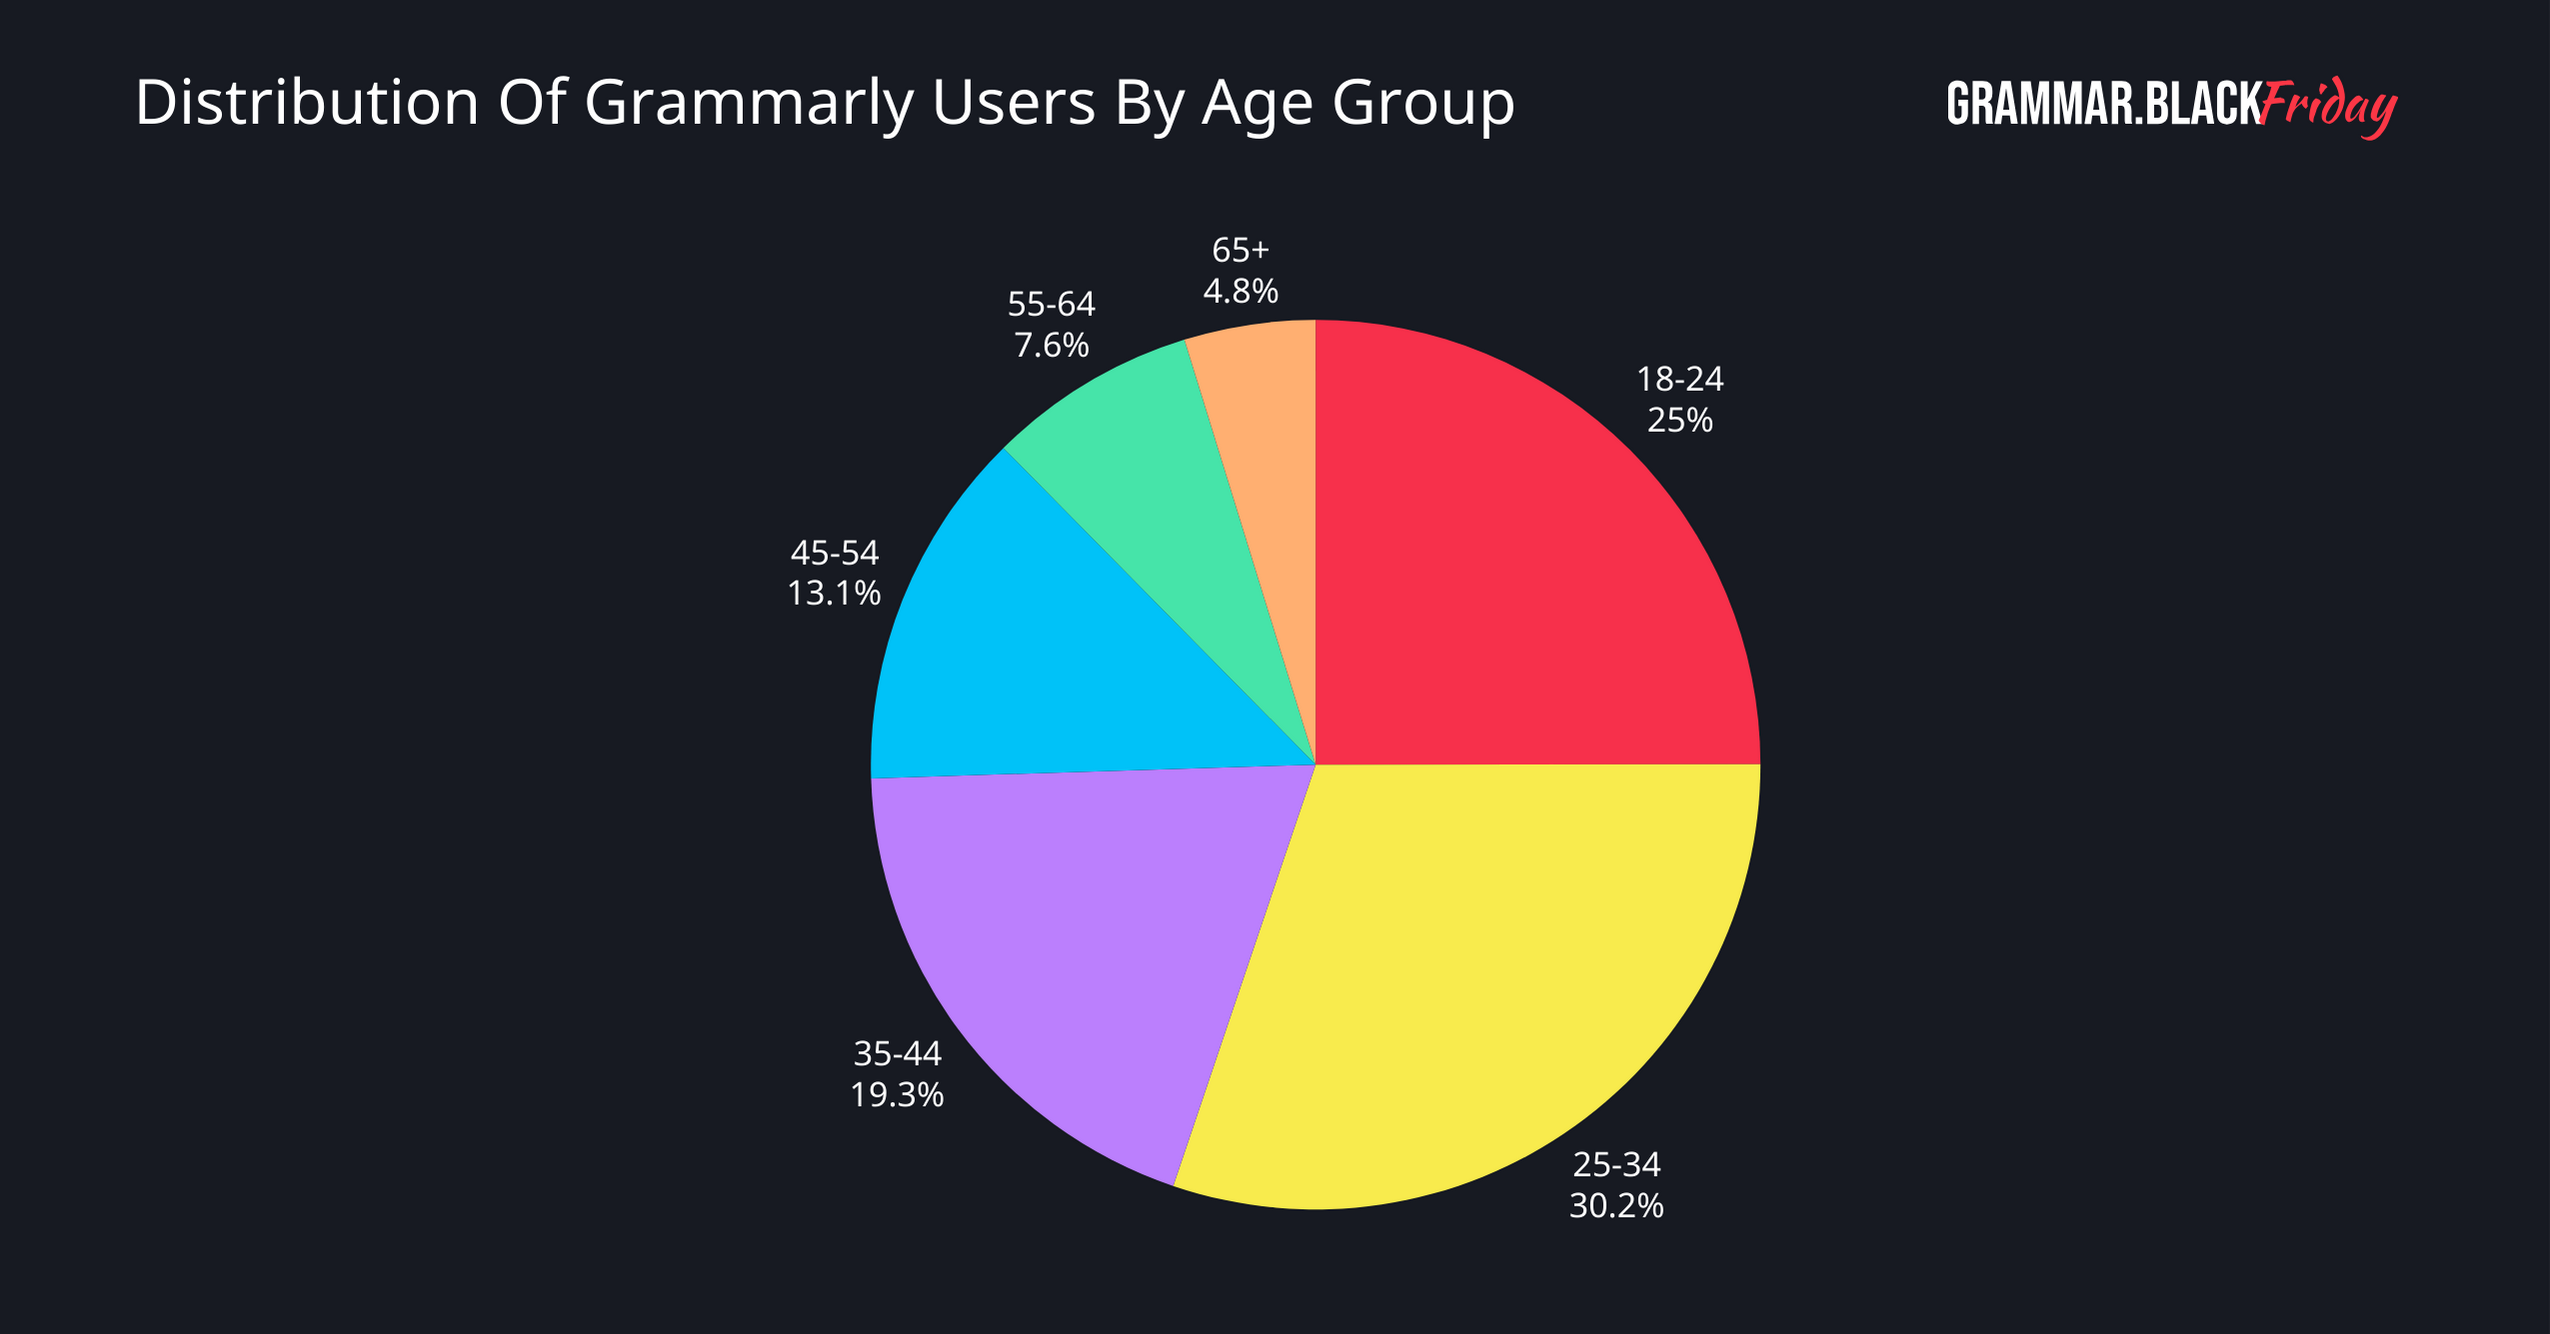 Distribution Of Grammarly Users By Age Group